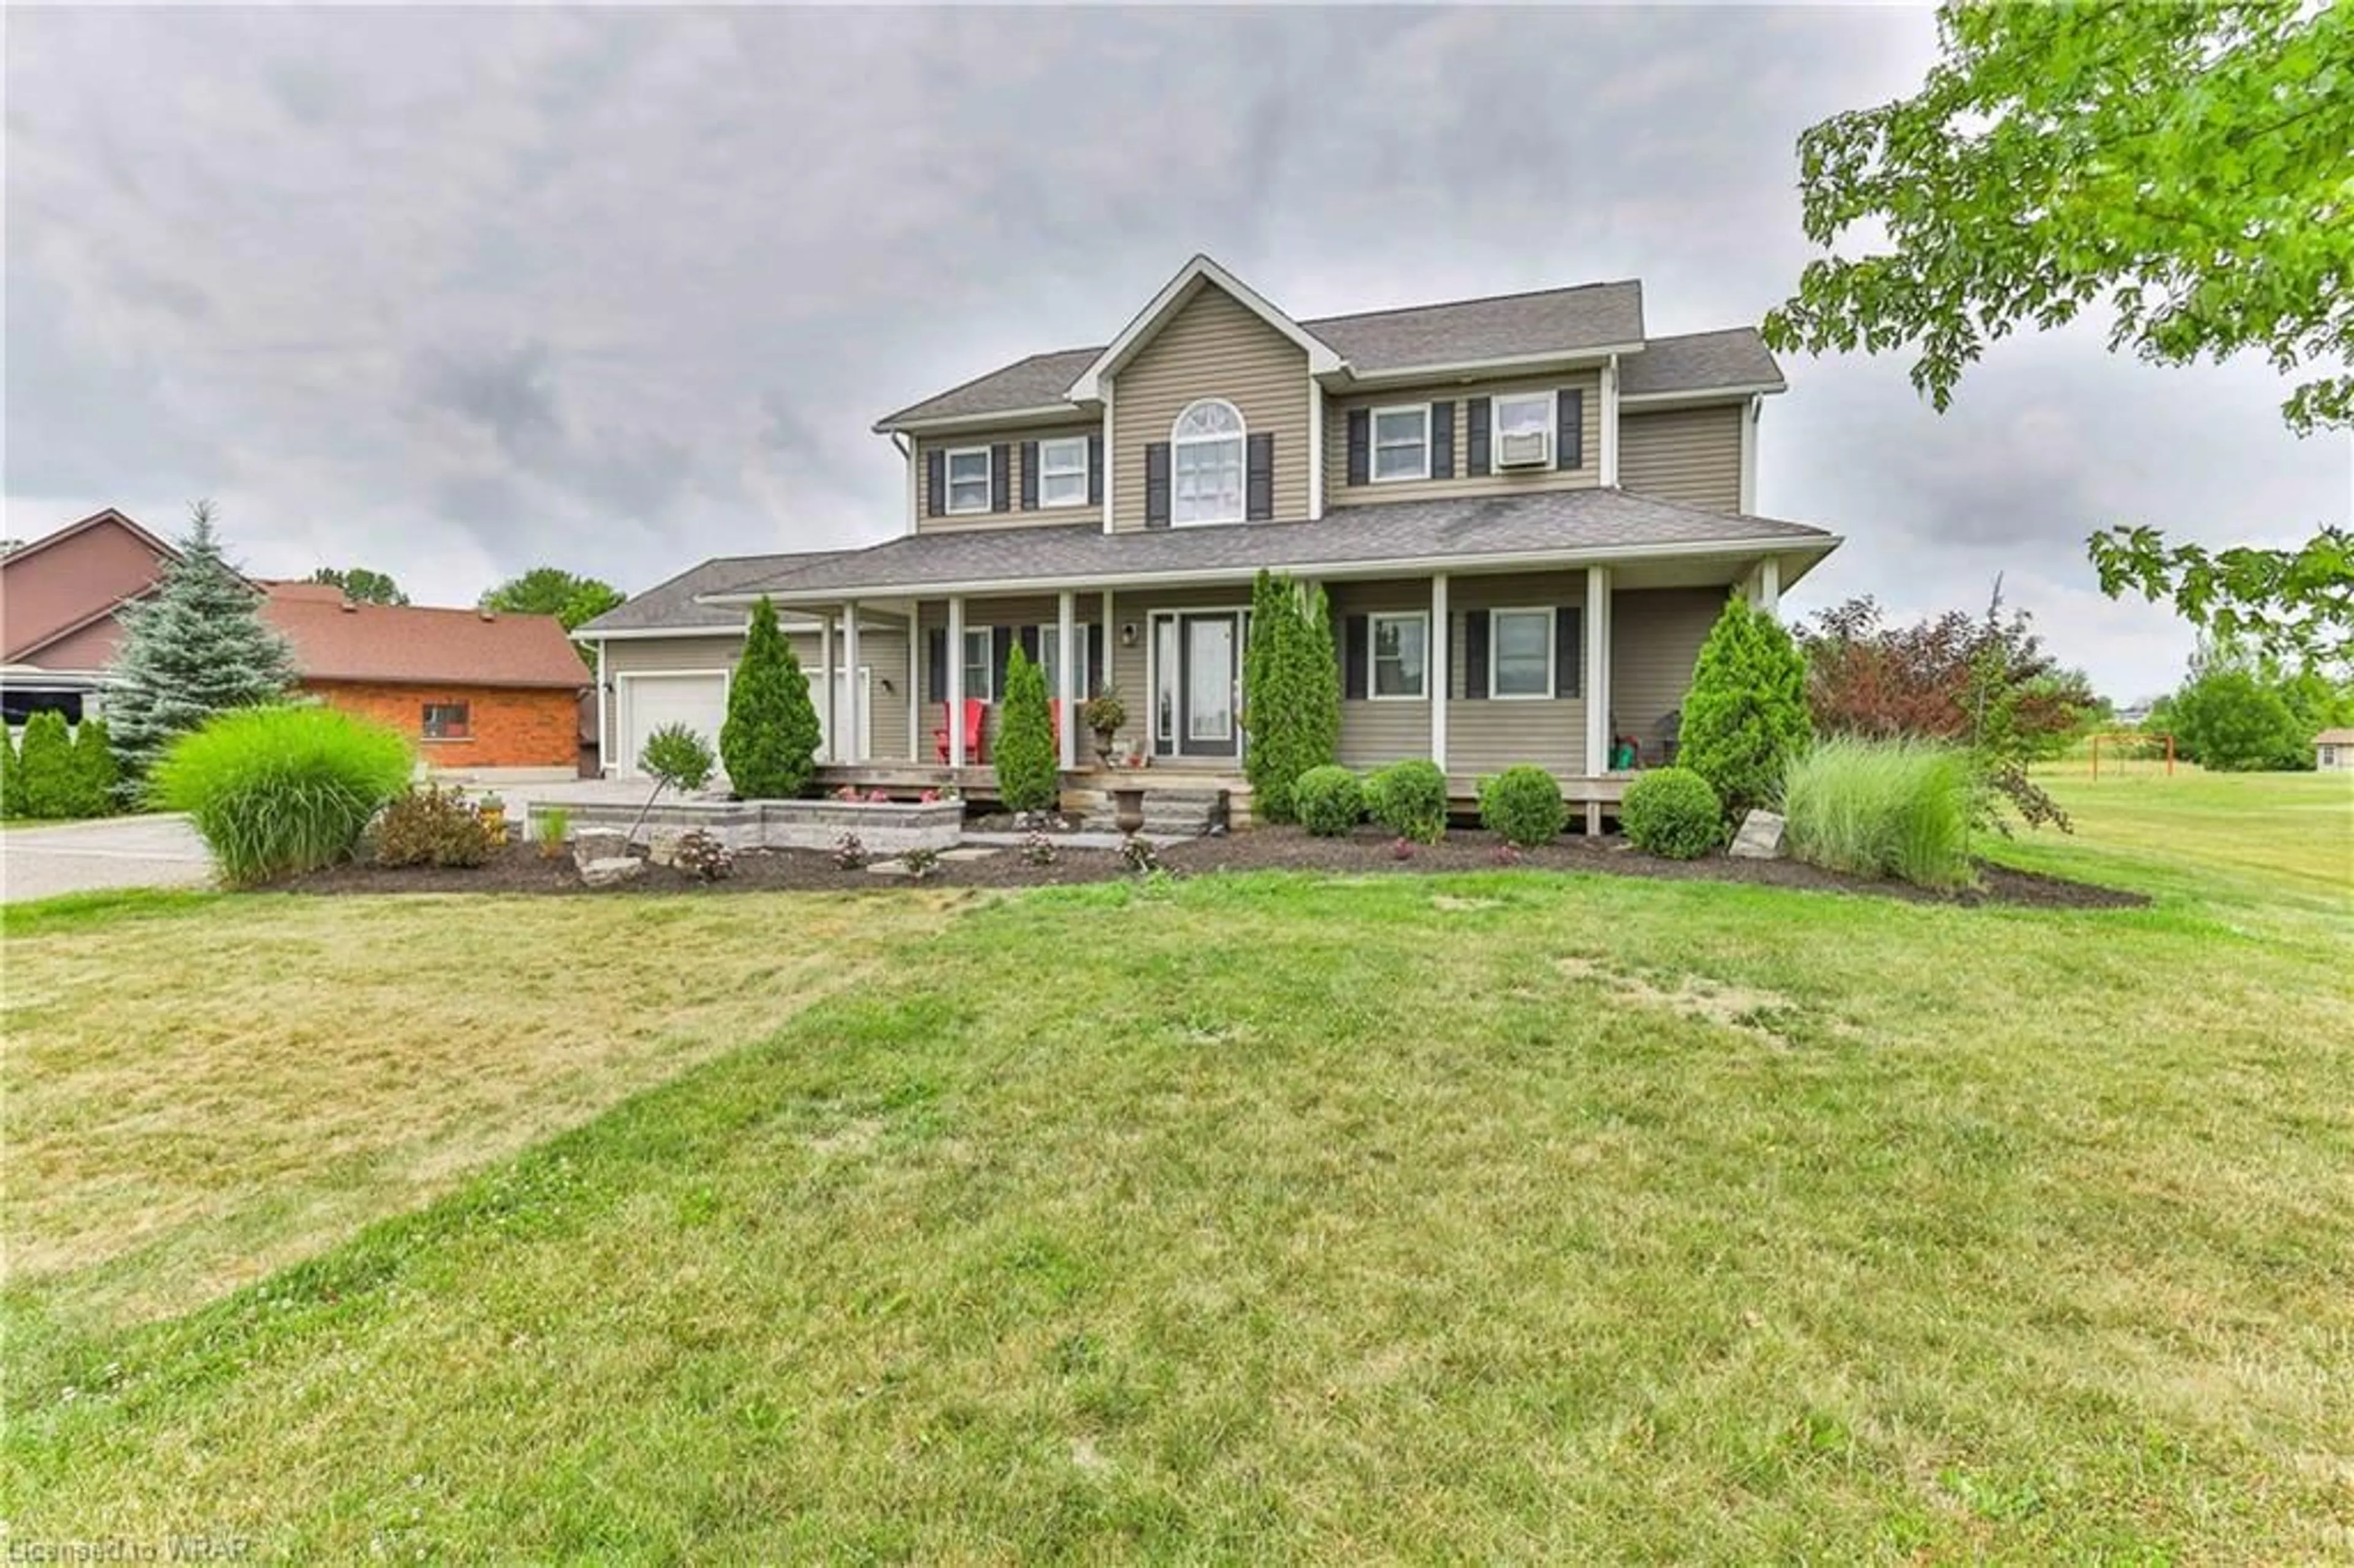 Frontside or backside of a home for 1015 Walton Ave, Listowel Ontario N4W 3S2